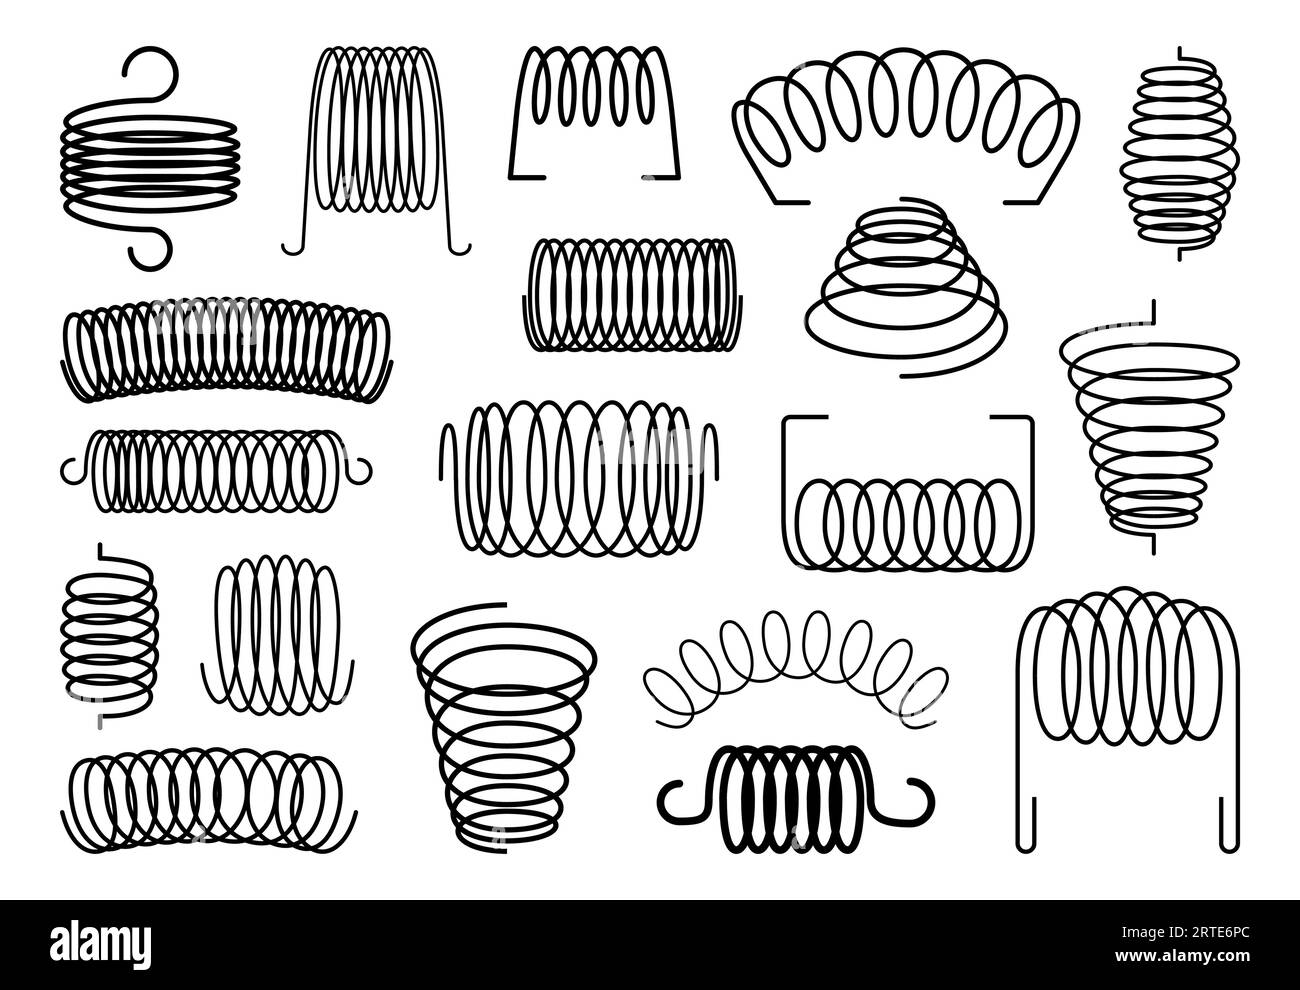 Spiral springs and coils, metal flexible wires and steel elastic bounces, vector icons. Mattress, machine suspension springs and shock absorbers, extended and compressed of different shapes Stock Vector